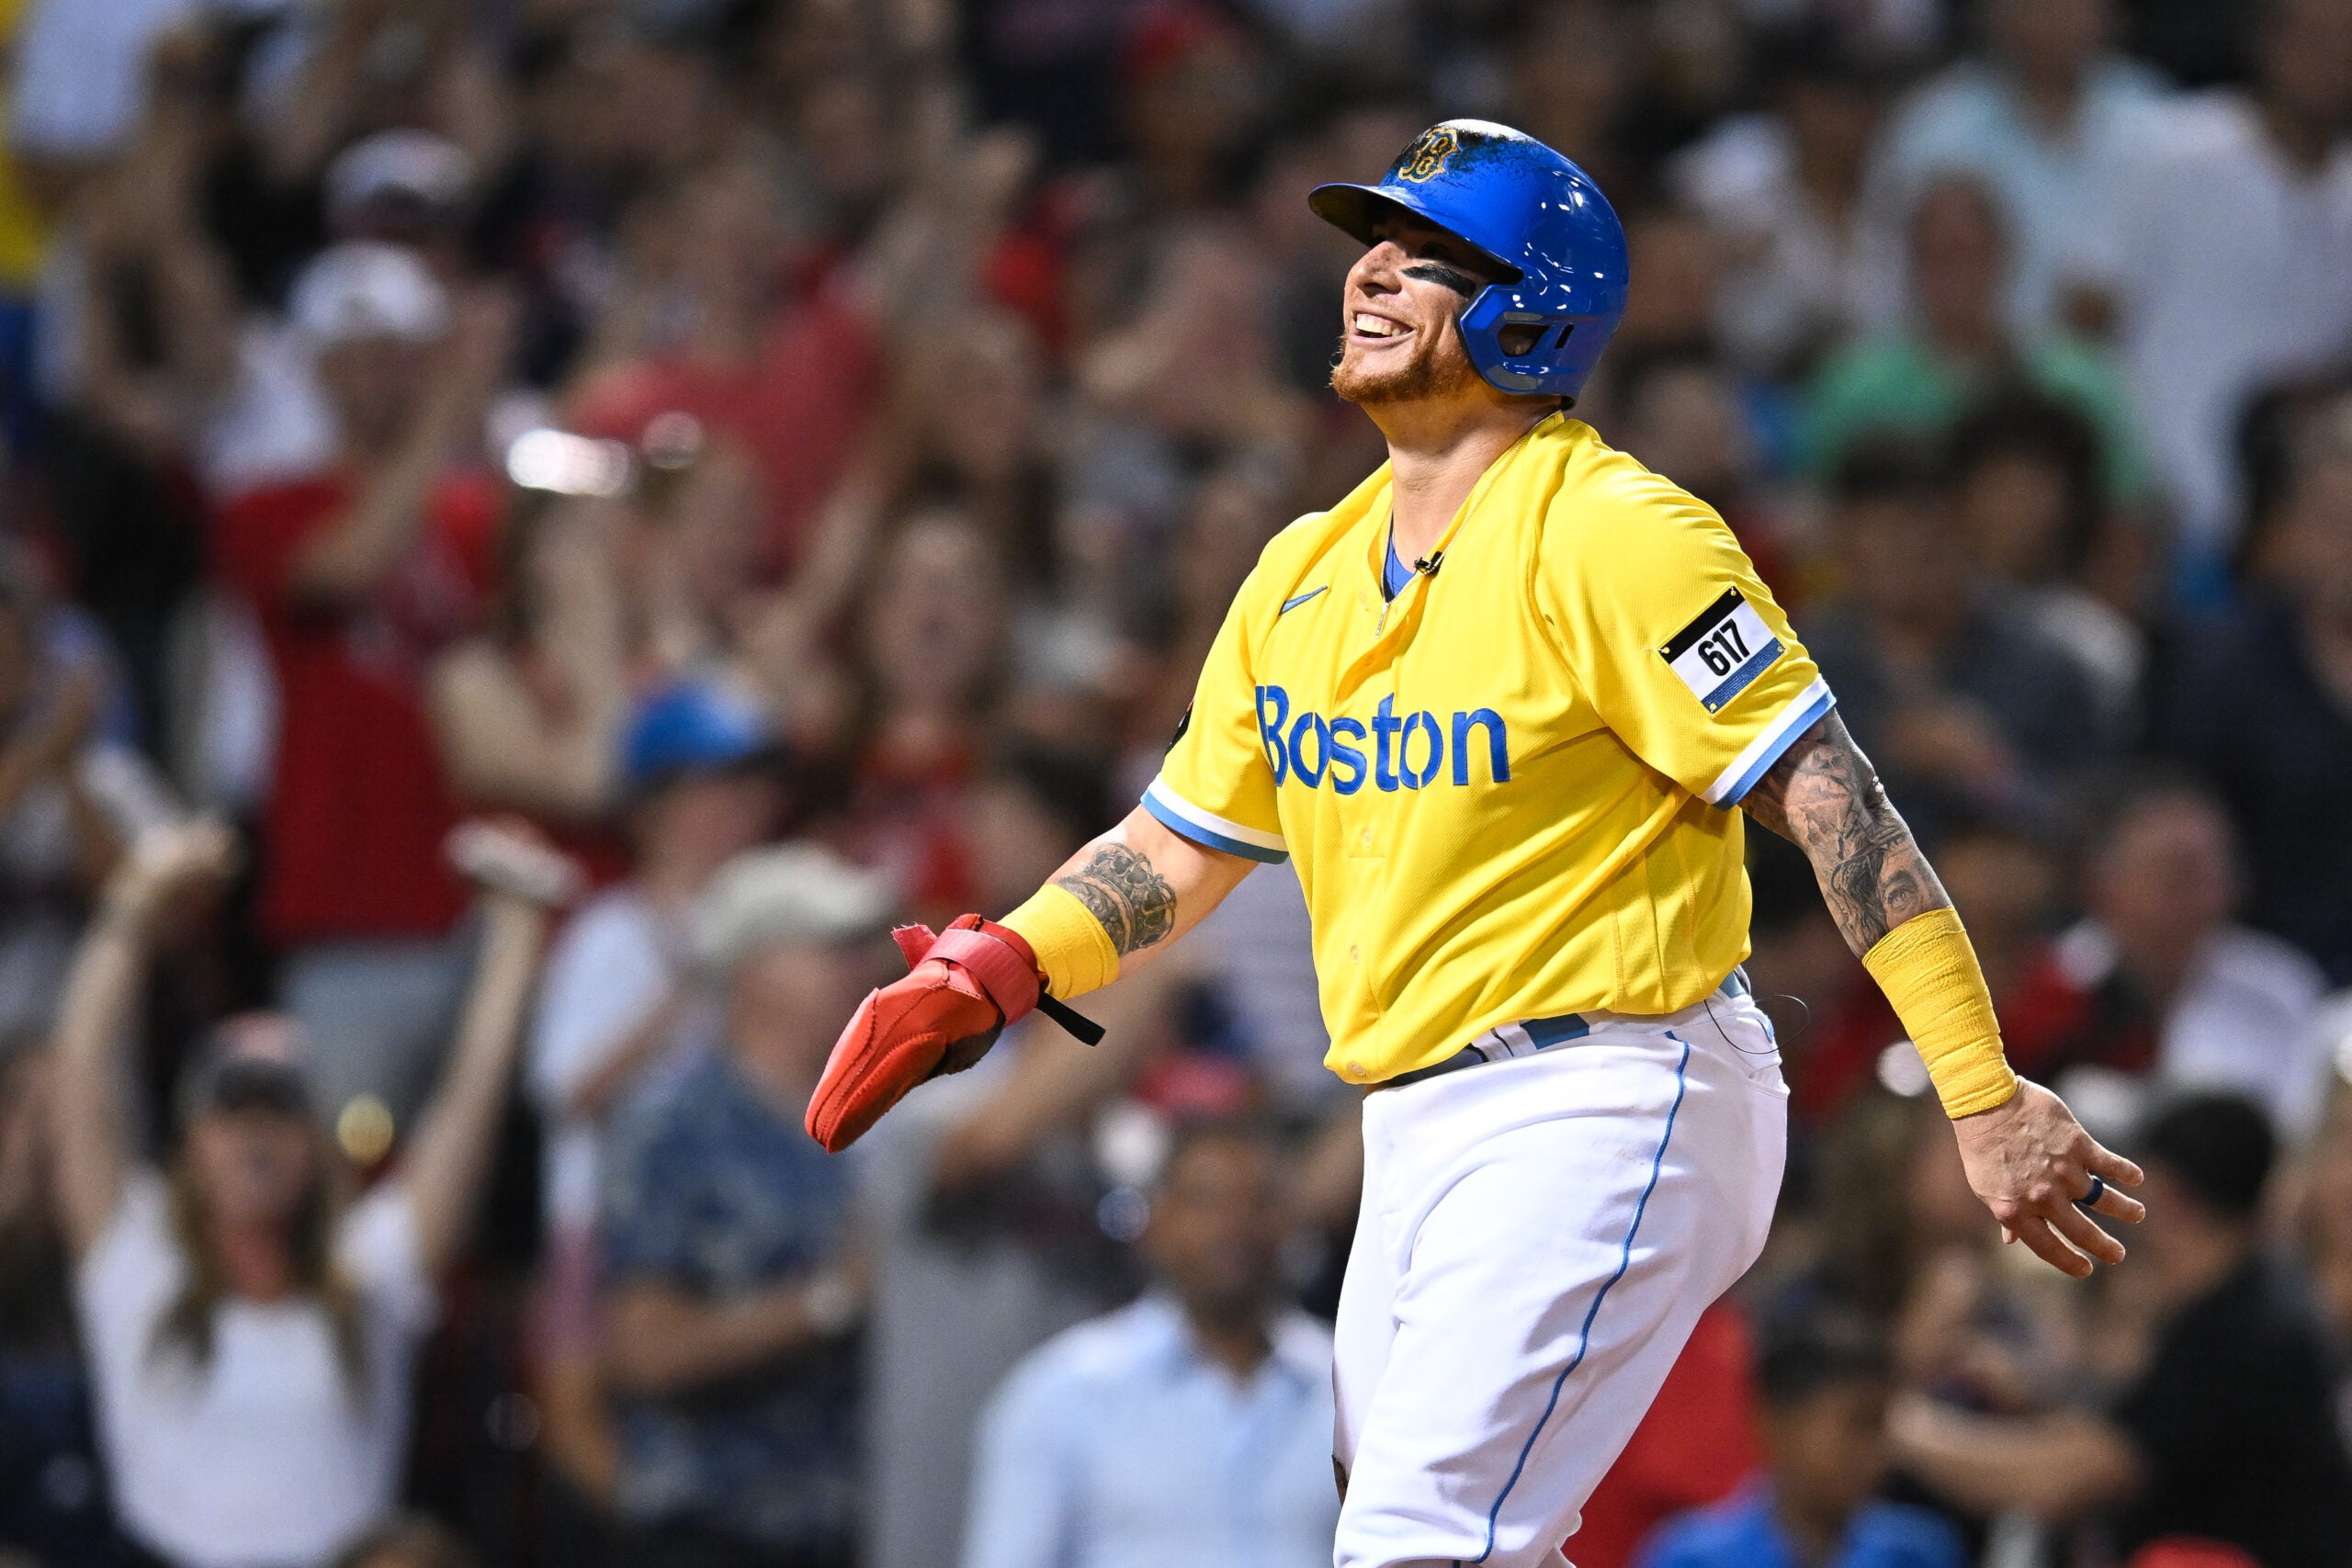 Red Sox whisk Christian Vazquez away after trade: 'It's a business